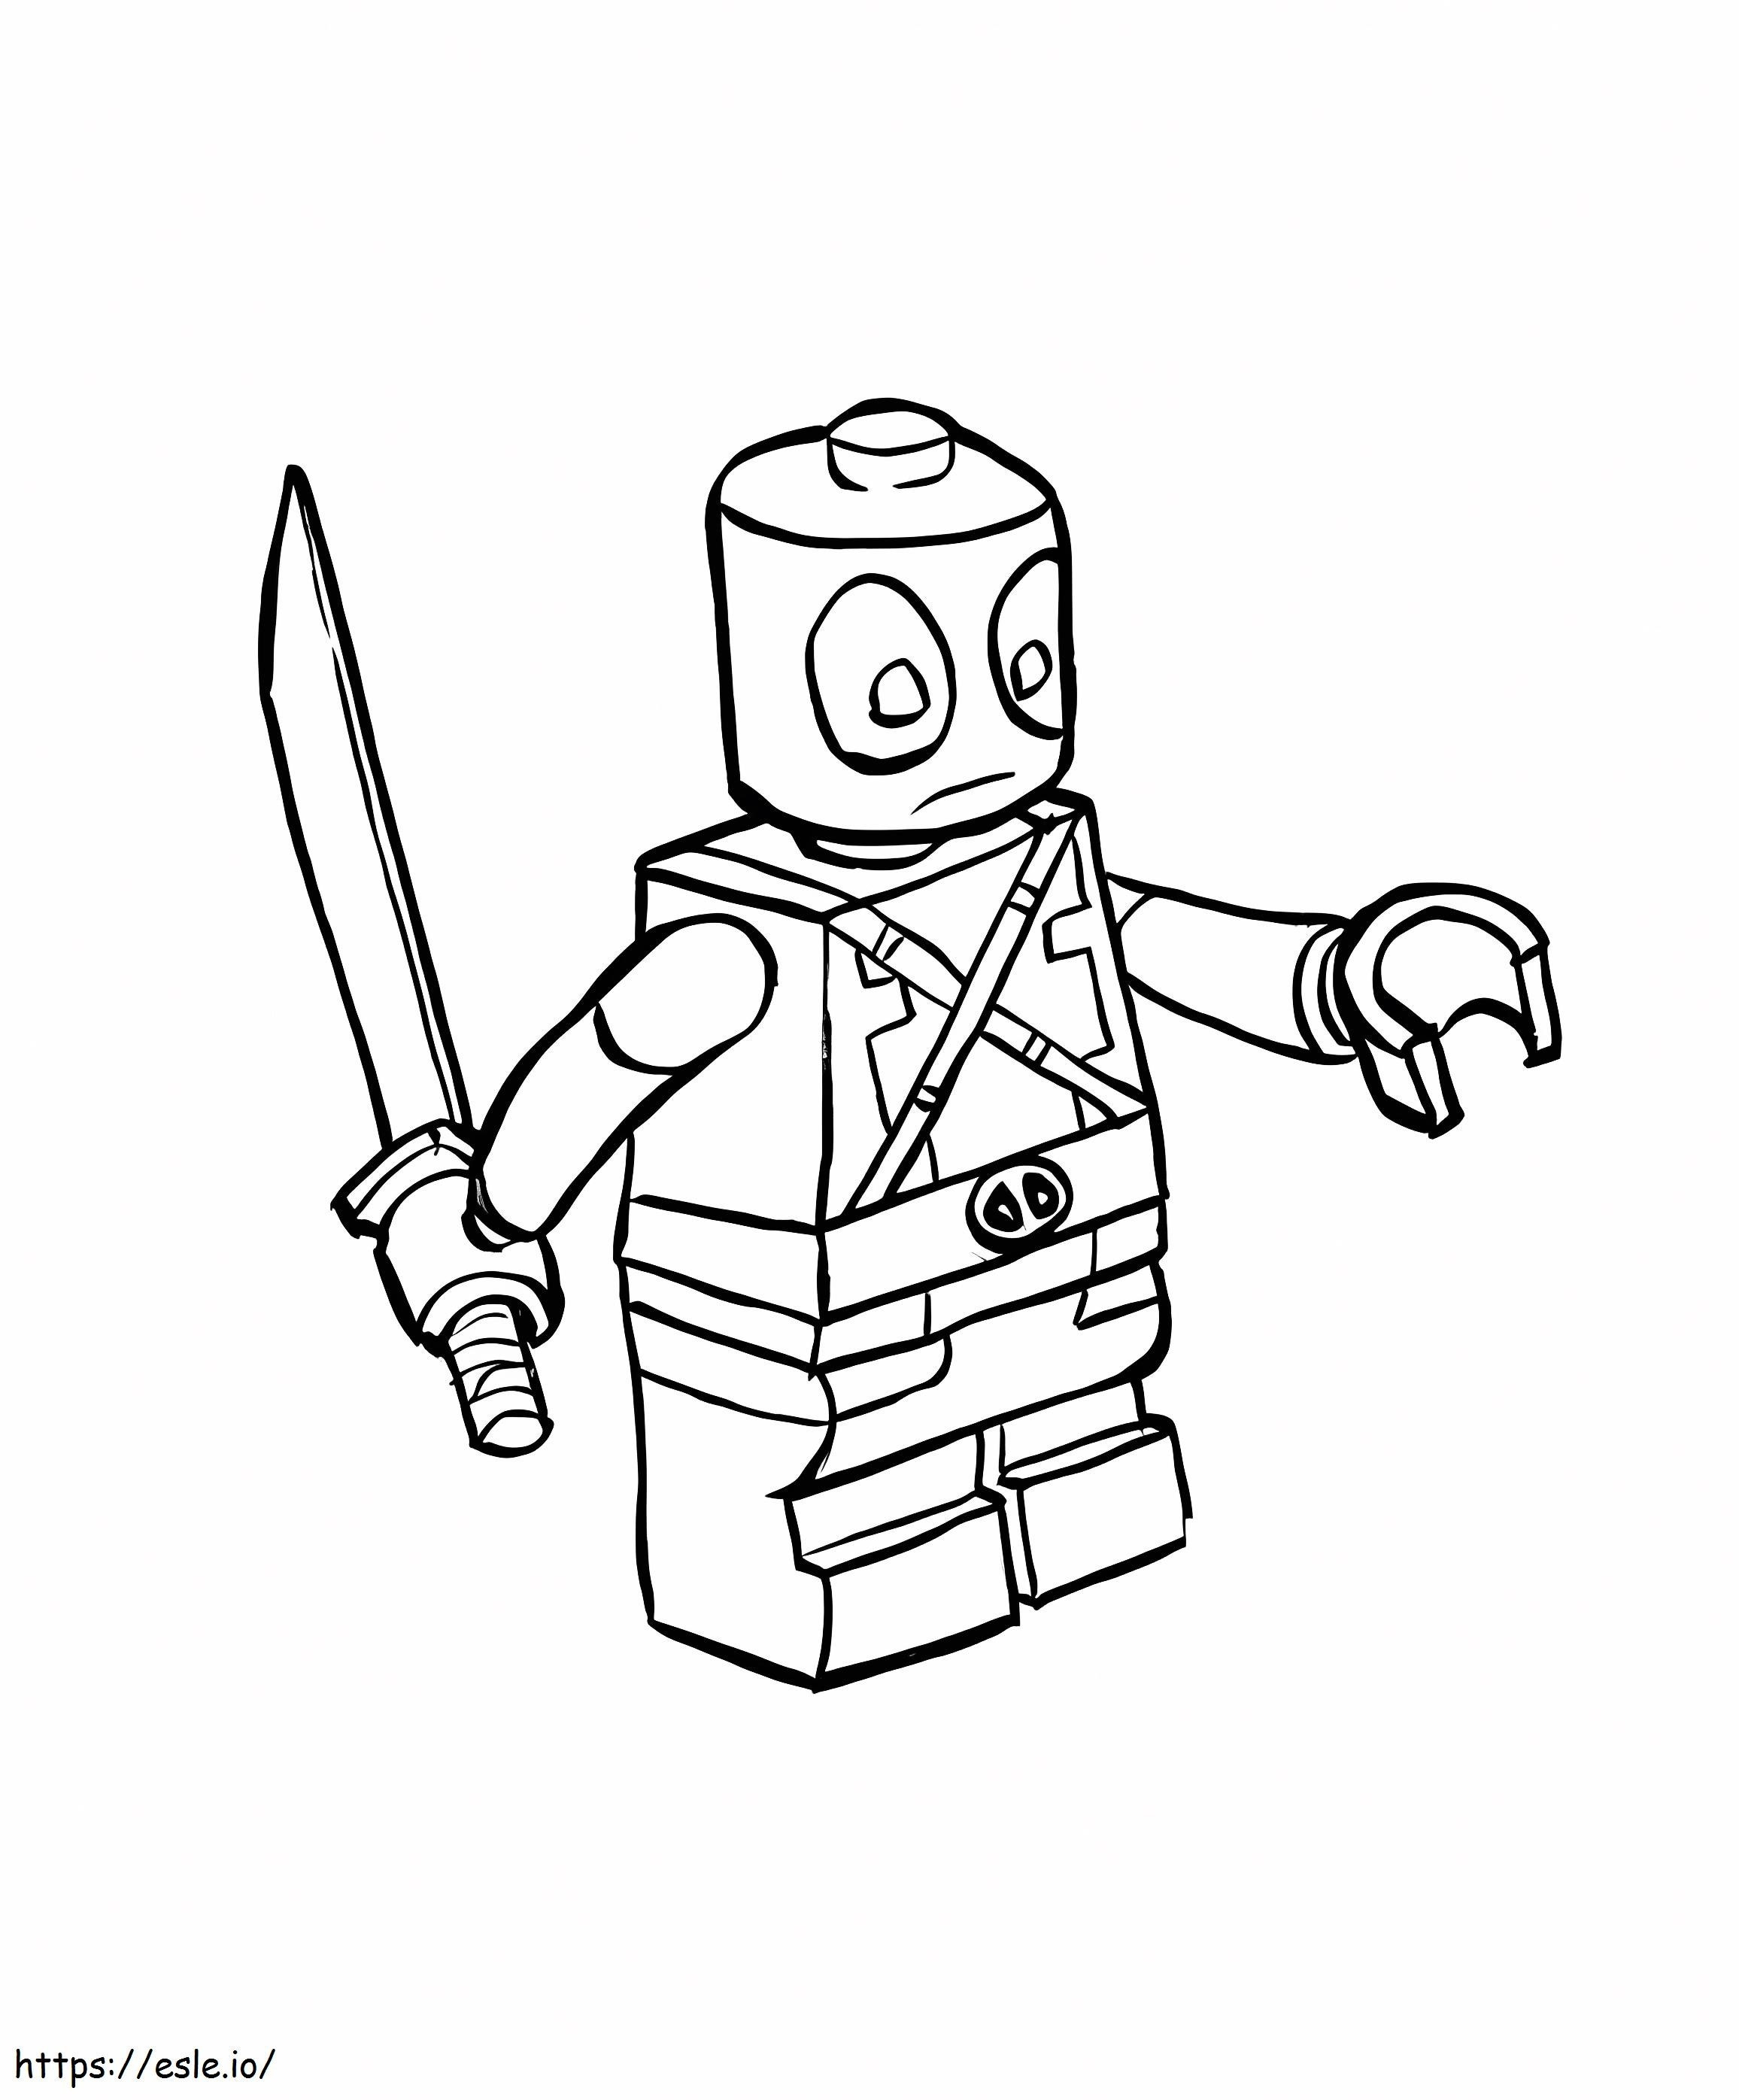 Drawing Lego Deadpool Holding Sword coloring page